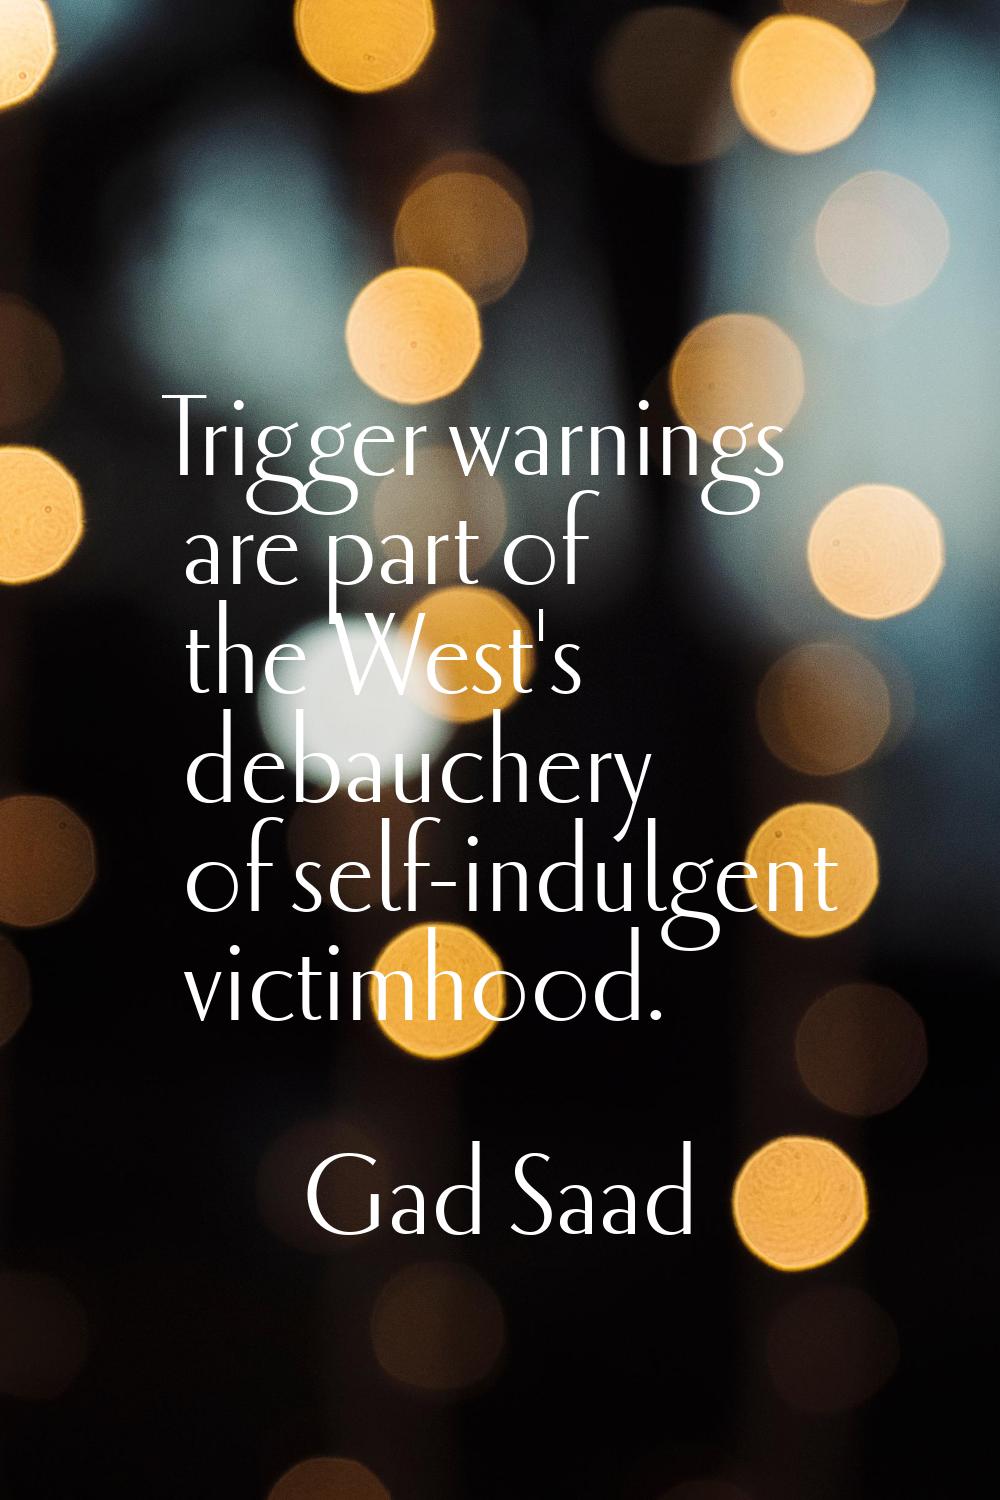 Trigger warnings are part of the West's debauchery of self-indulgent victimhood.